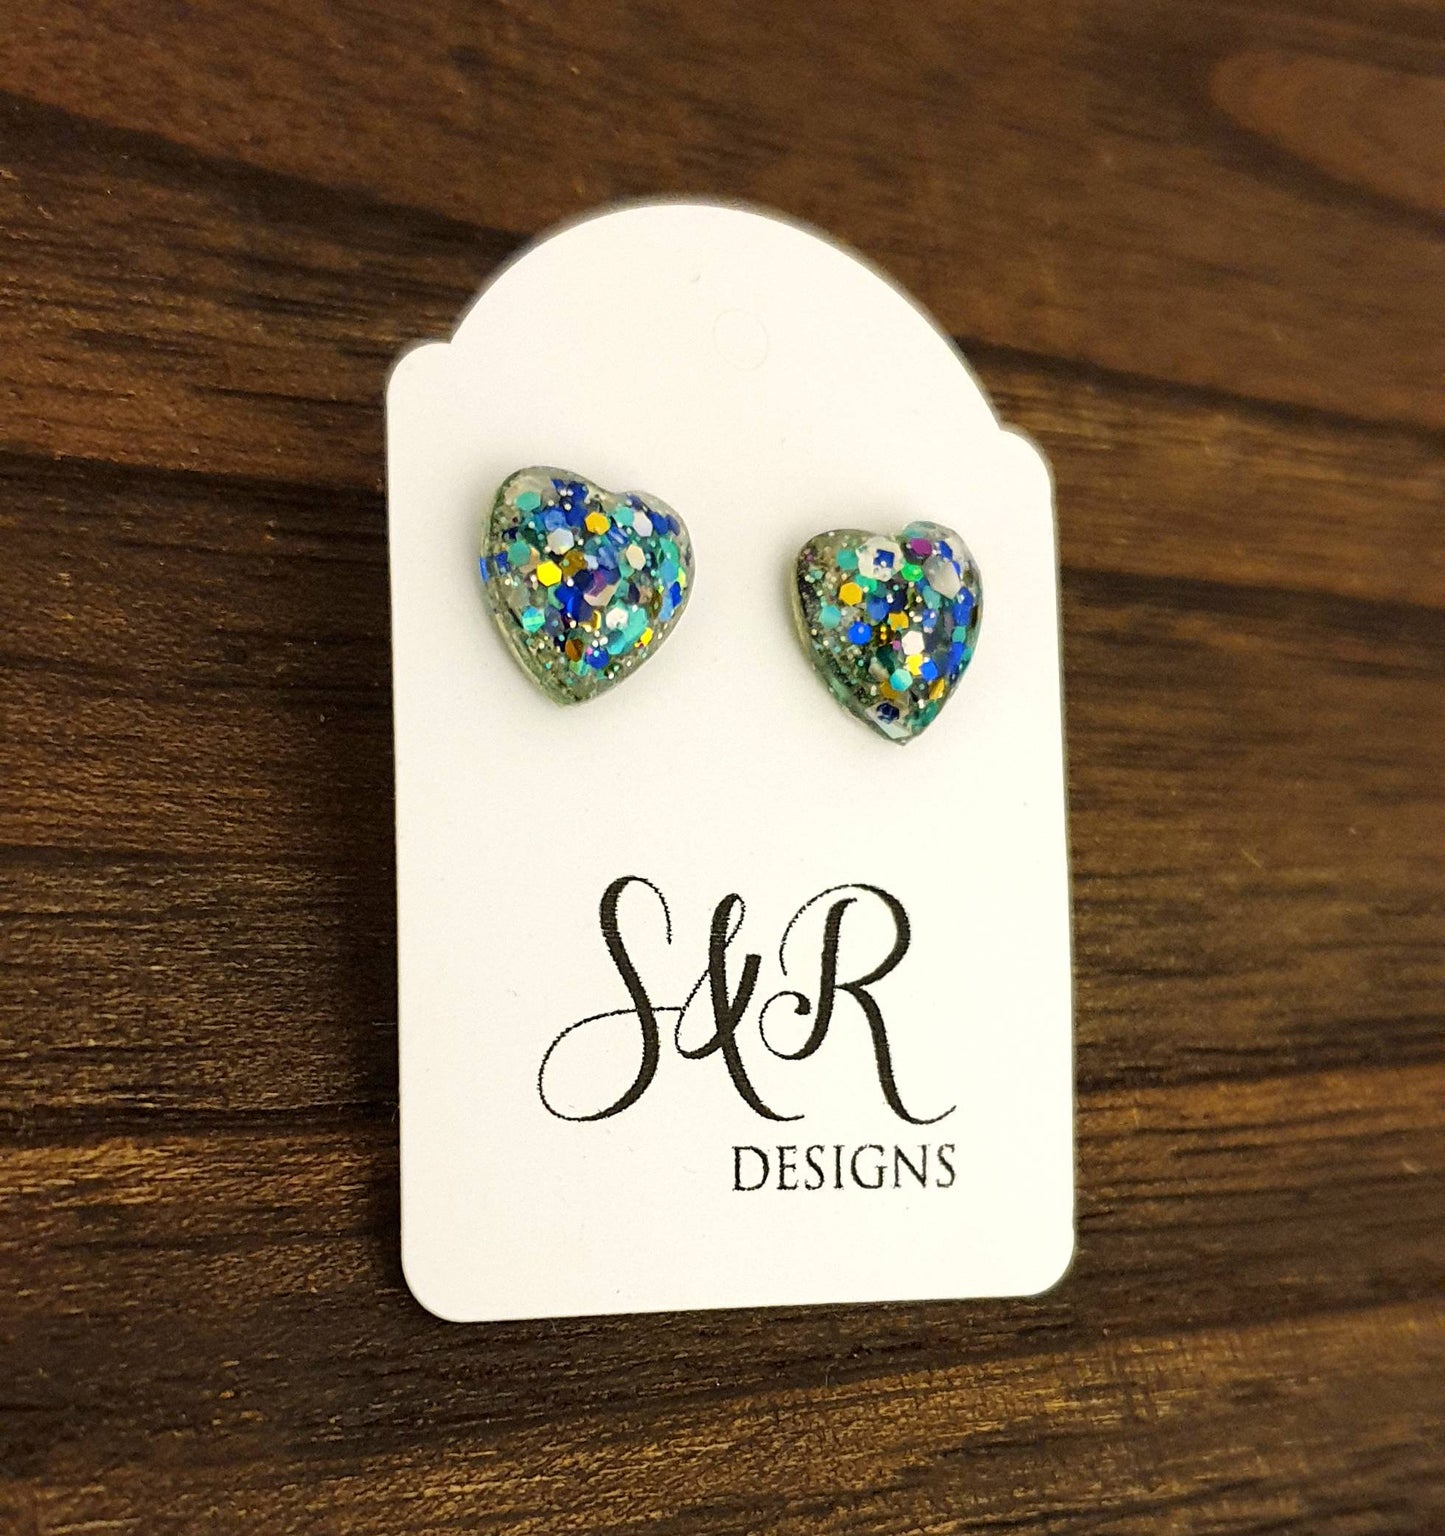 Heart Resin Stud Earrings, Sparkly Teal Silver Blue Mix Glitter, Stainless Steel 10mm Hearts